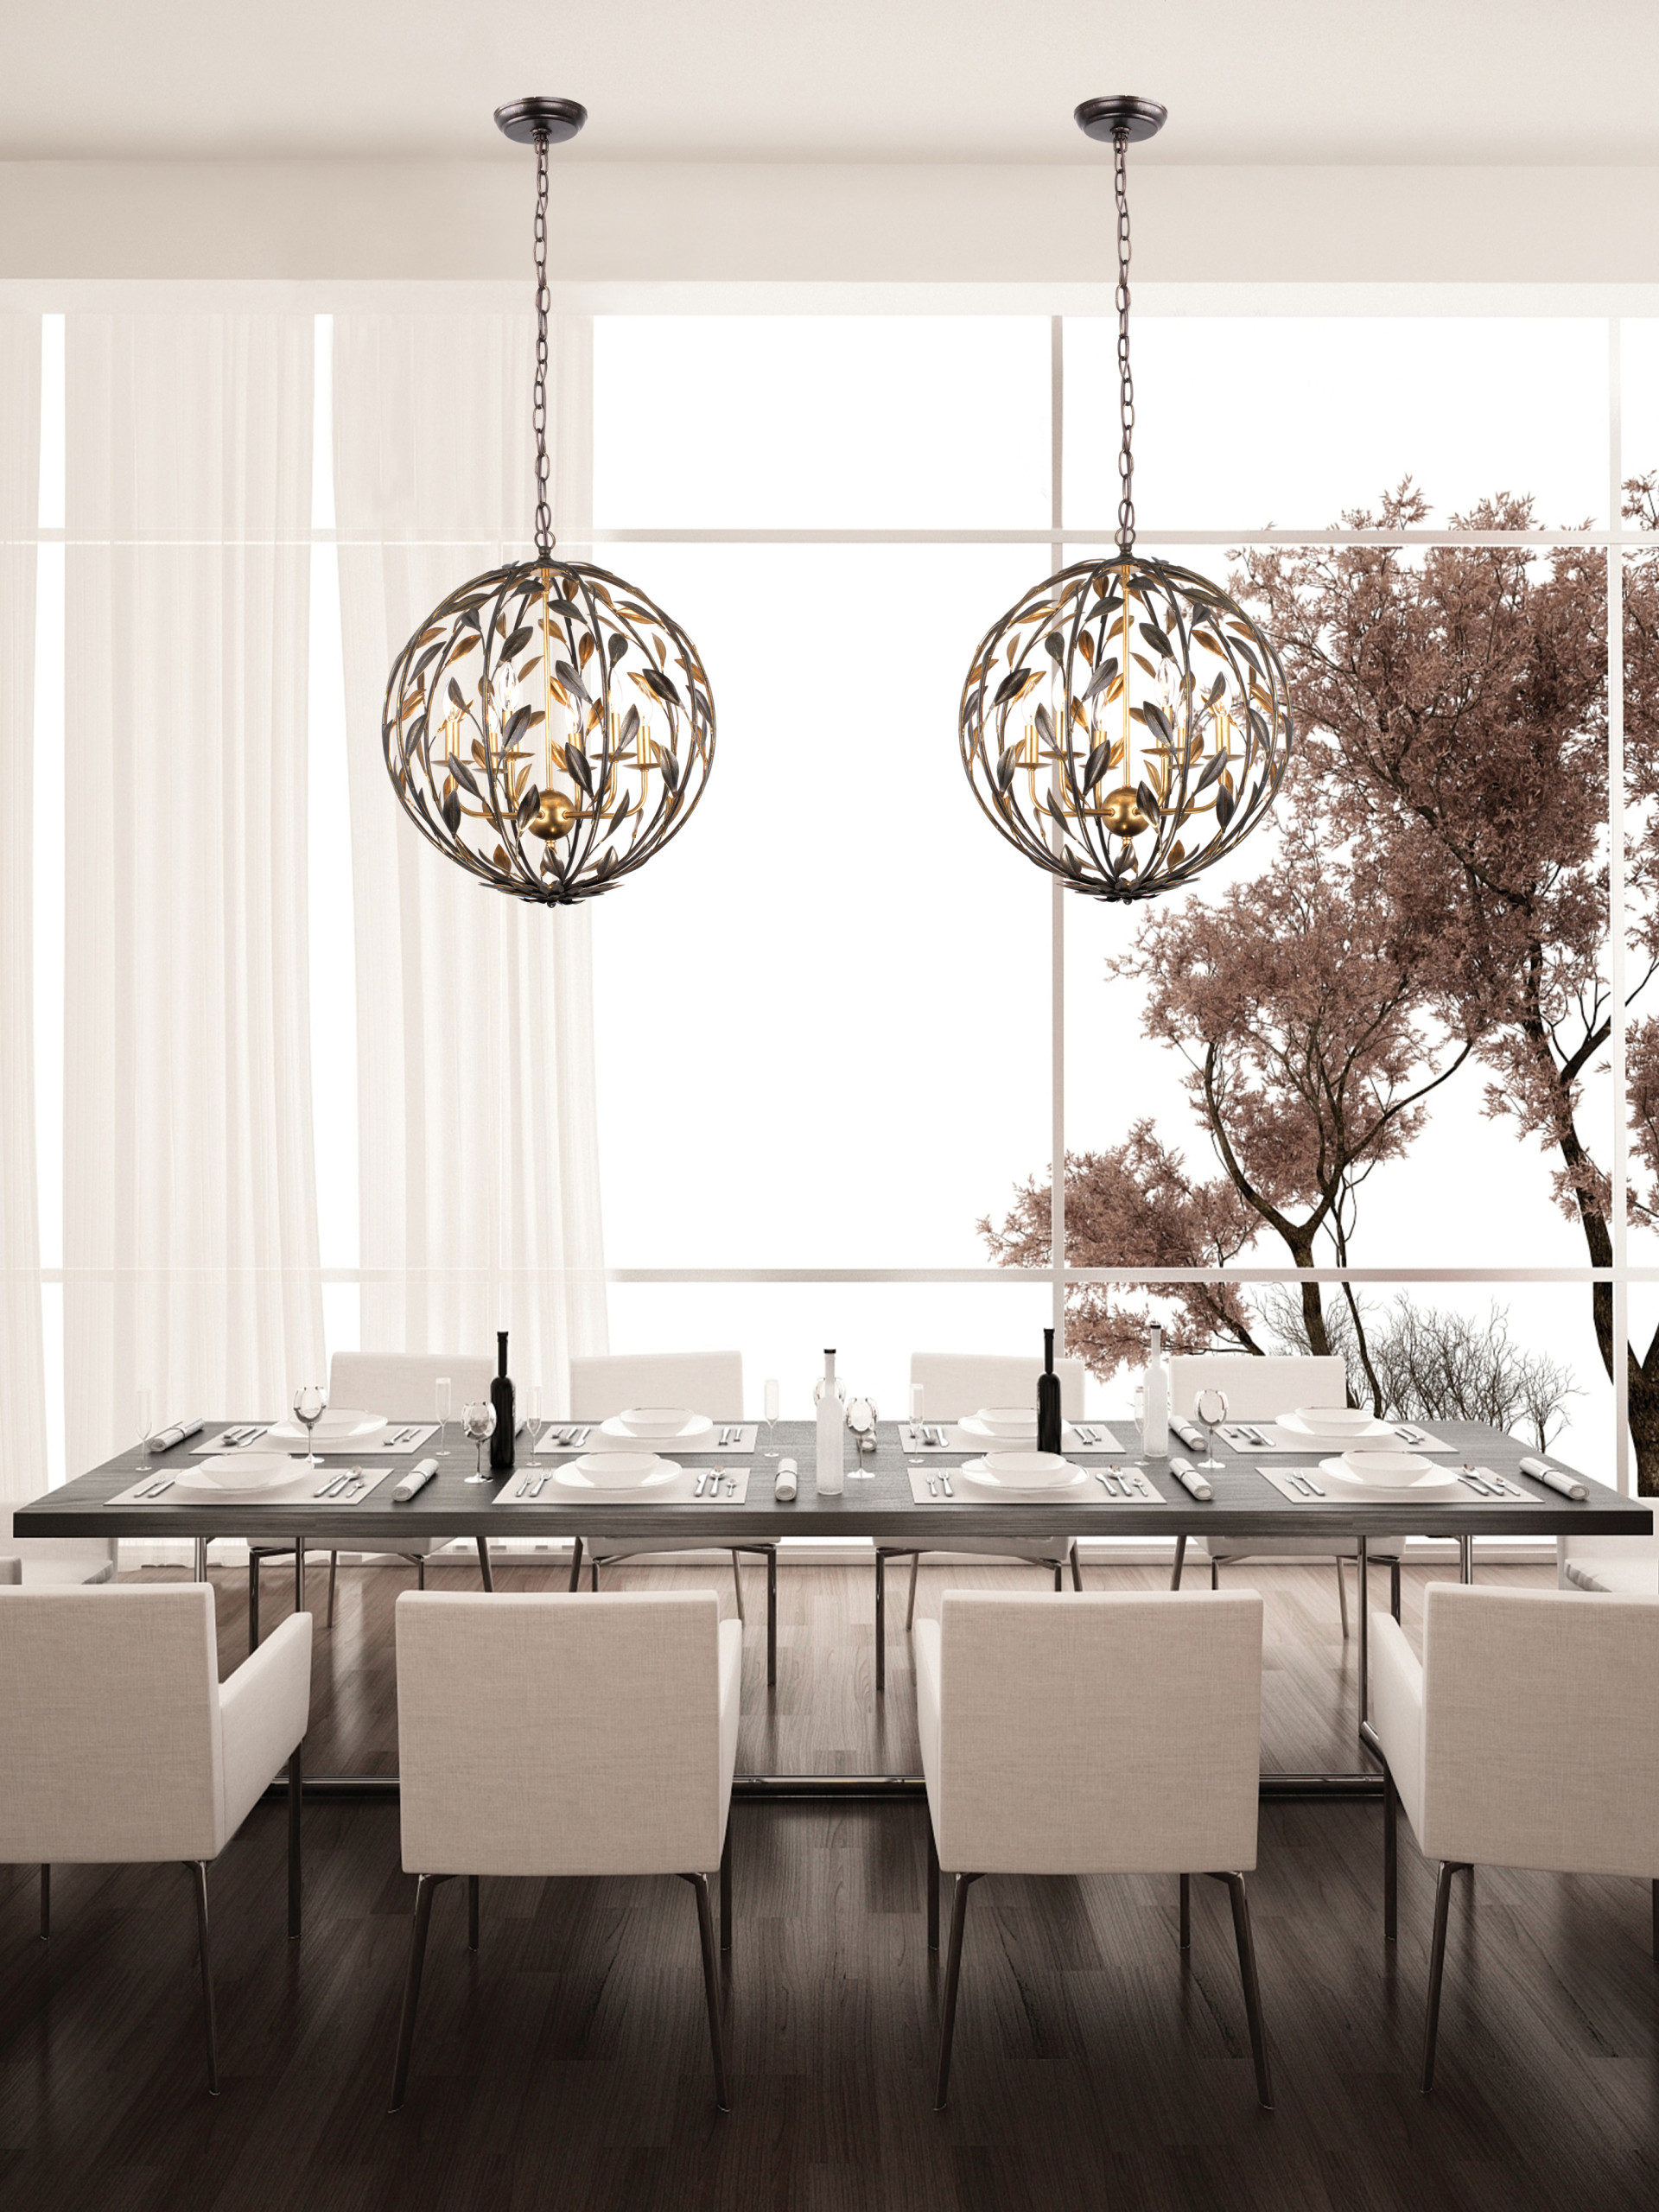 Broche Collection 6-Light 21" English Bronze Chandelier - Contemporary -  Dining Room - New York - by We Got Lites | Houzz